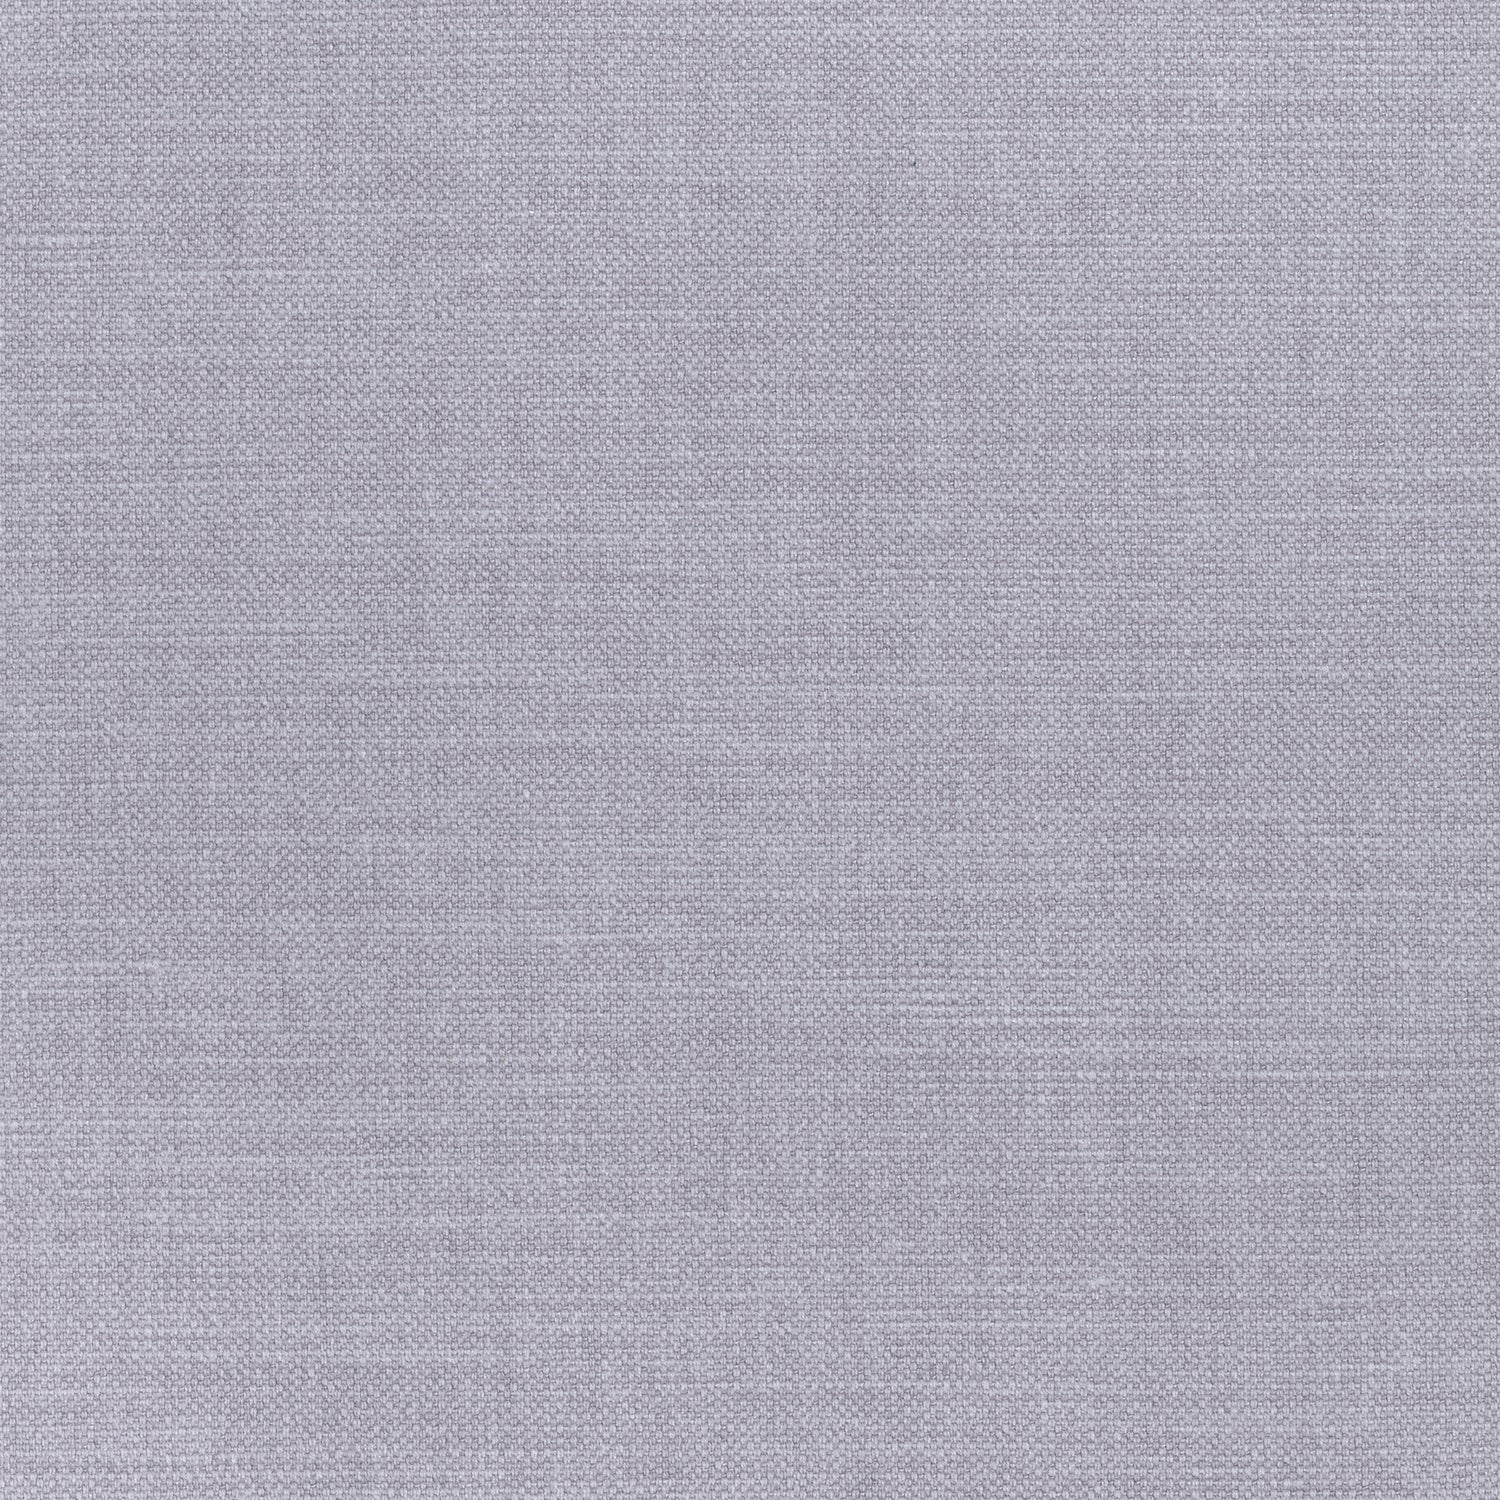 Prisma fabric in lavender color - pattern number W70136 - by Thibaut in the Woven Resource Vol 12 Prisma Fabrics collection